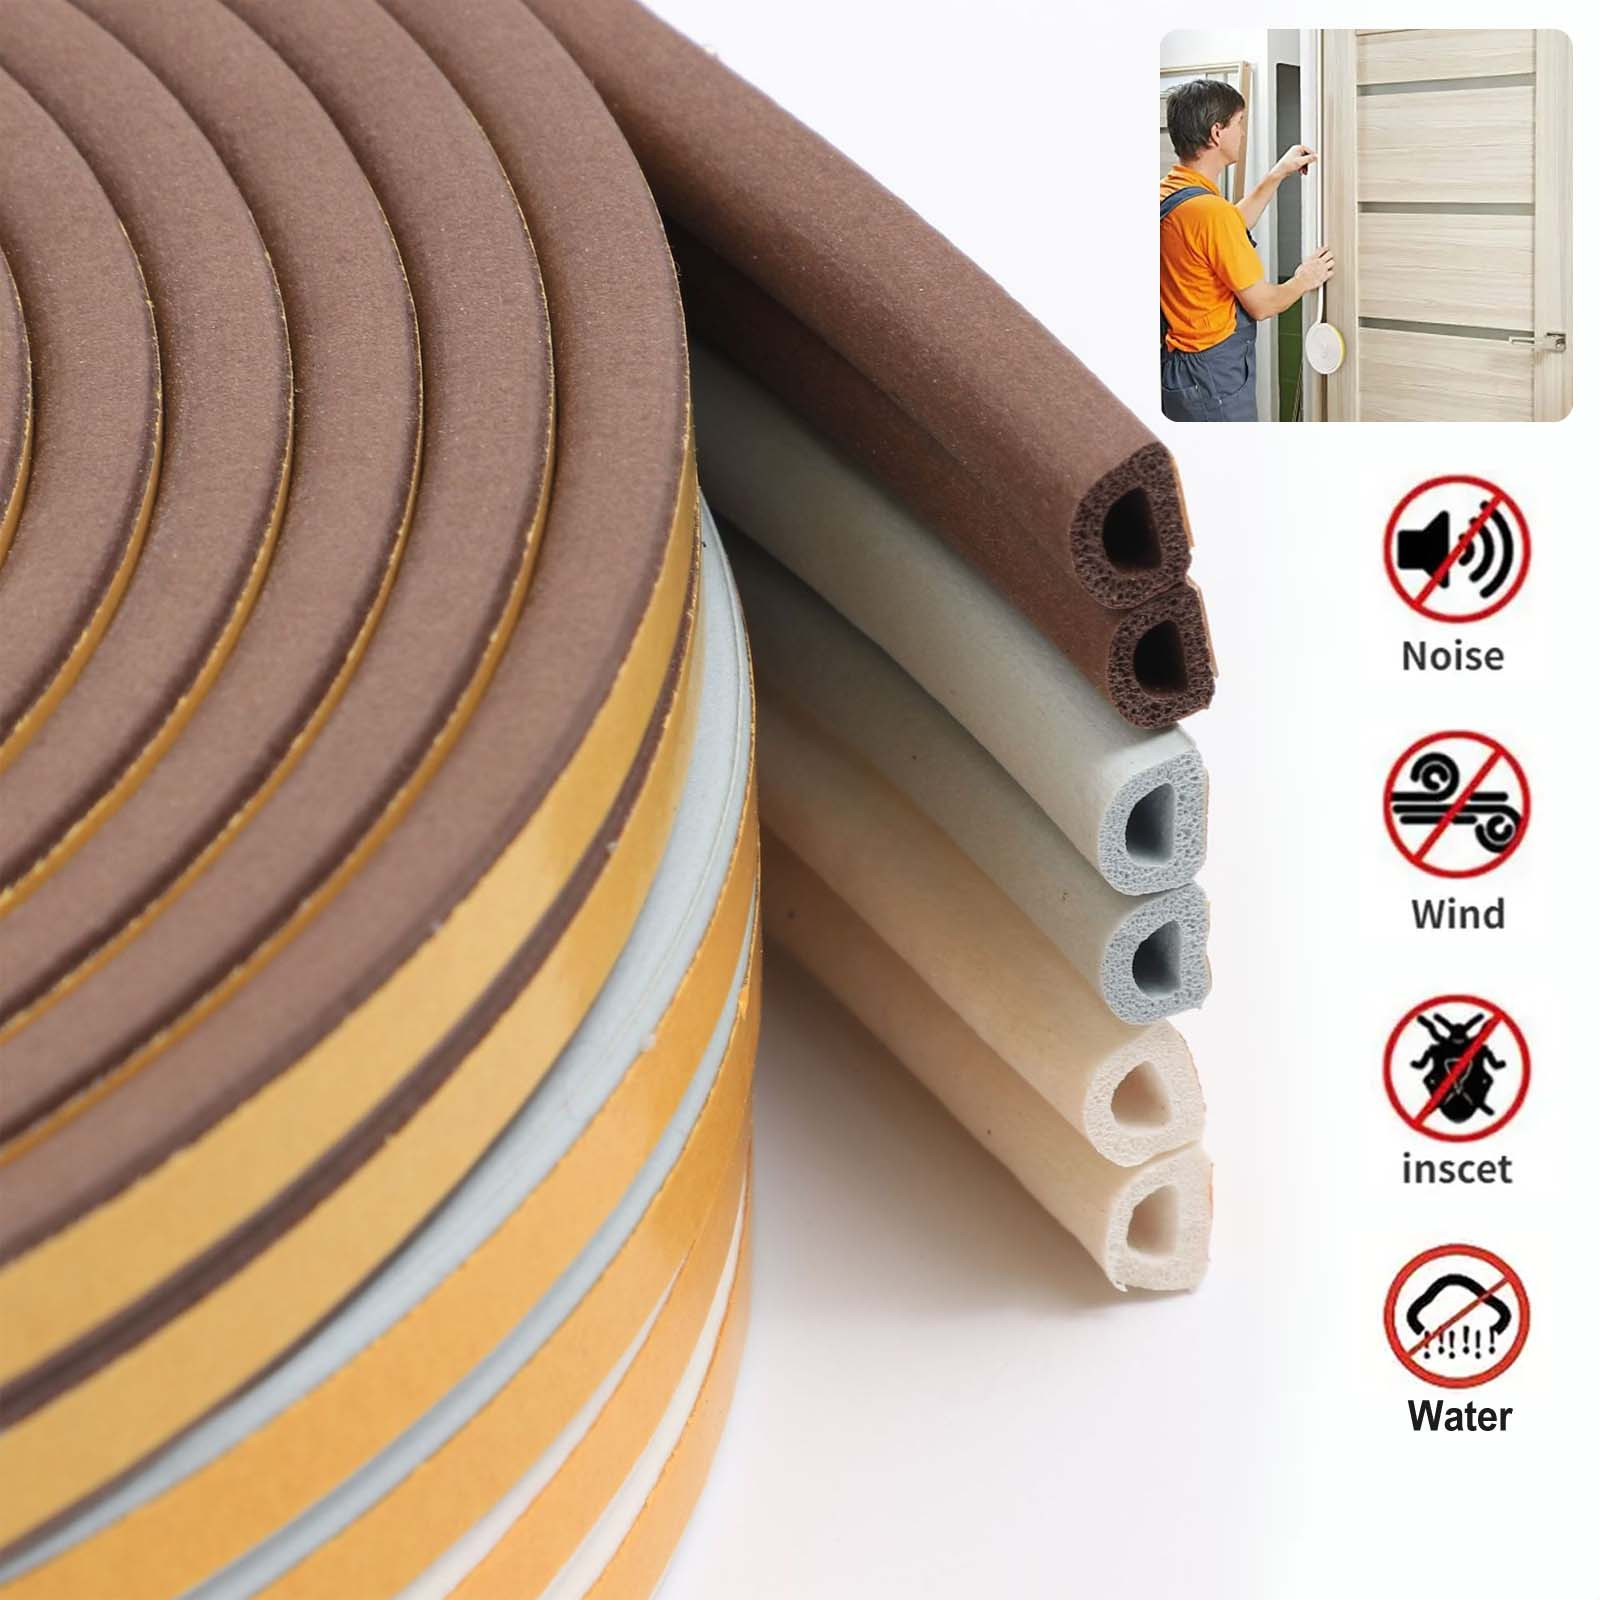 

1pc, 5m Door Weather Stripping, Window Seal Strip For Doors And Windows - Self-adhesive Foam Weather Strip Door Seal | Soundproof Seal Strip Insulation For Home, Office, School, Shops Stores&hotels